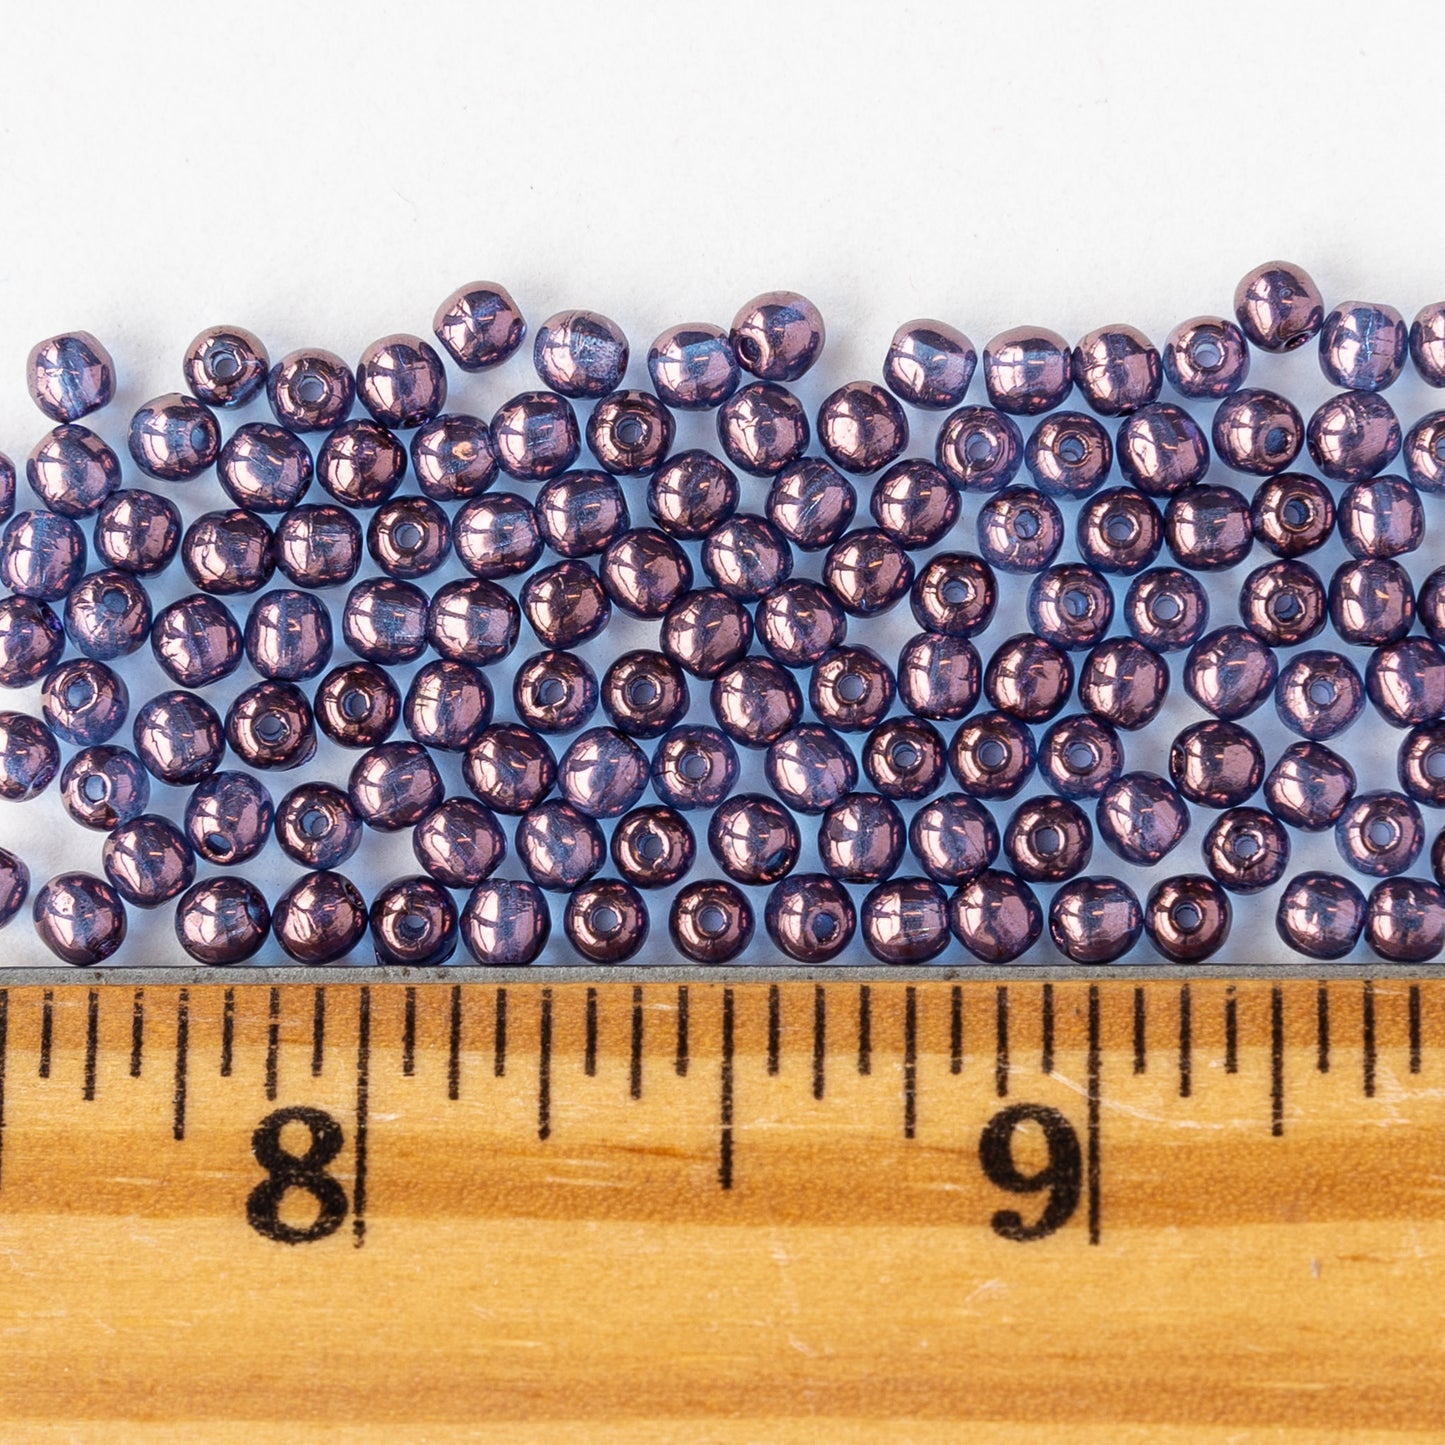 3mm Round Glass Beads -  Amethyst Luster - 120 Beads